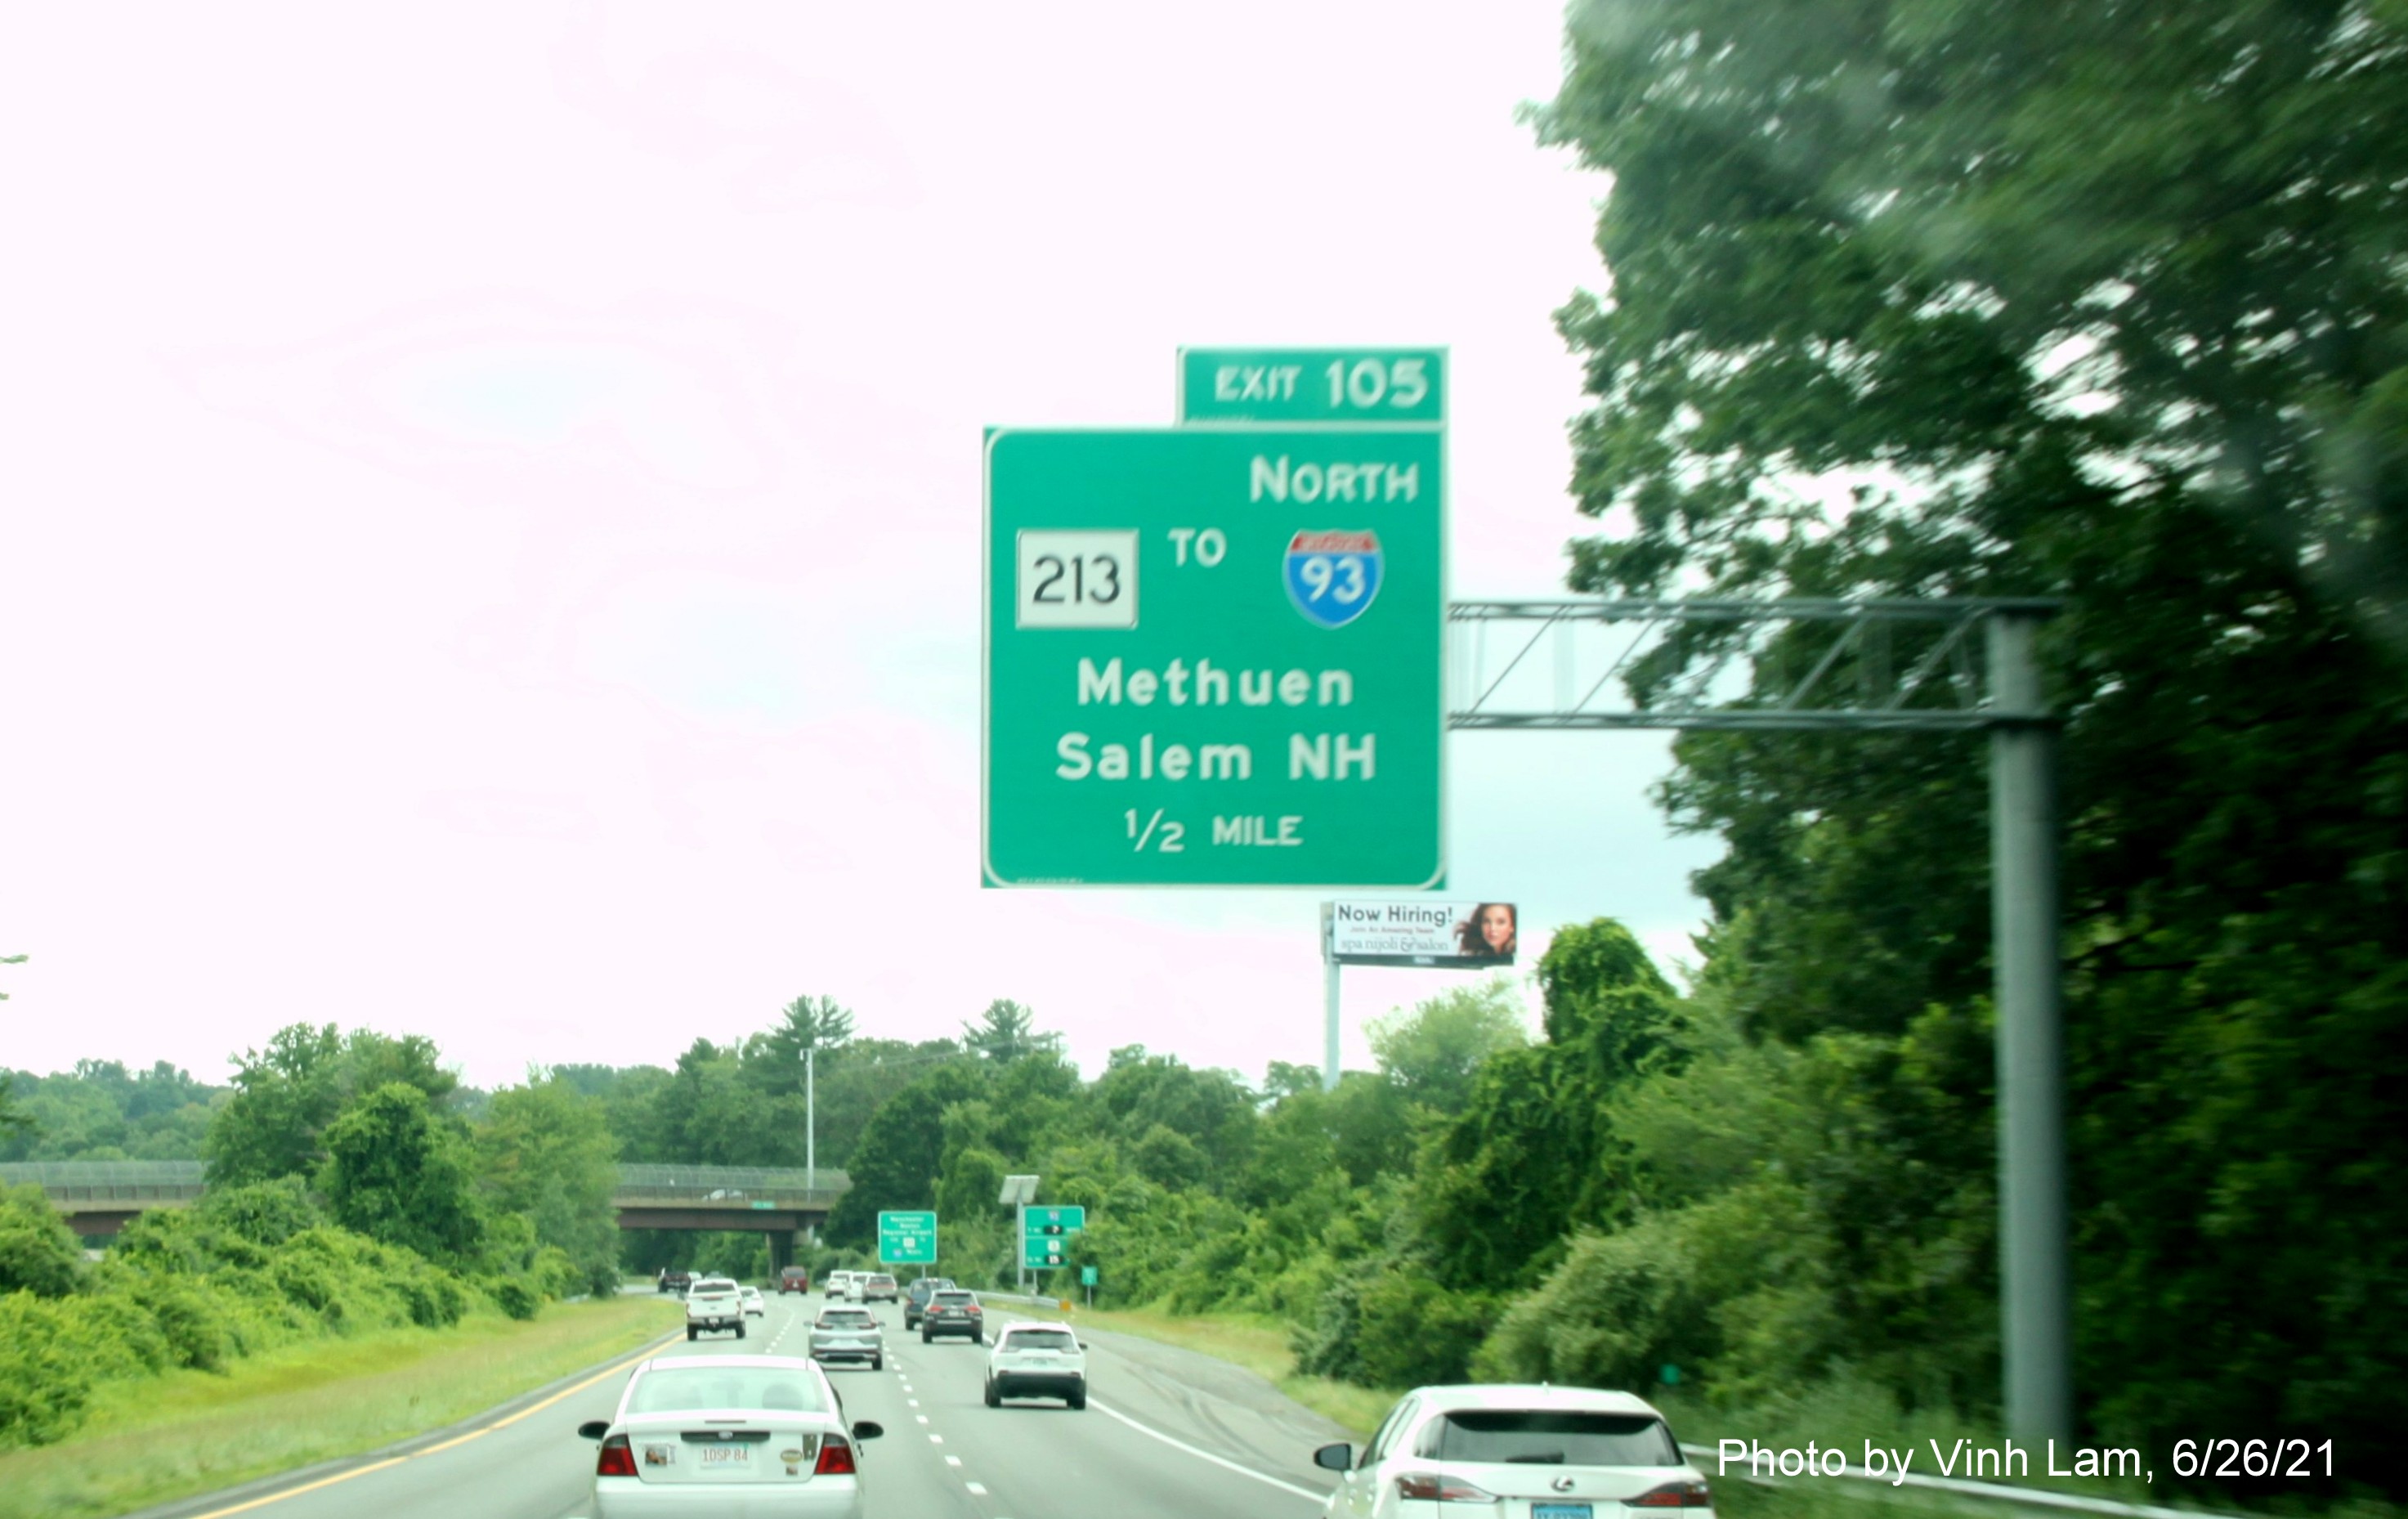 Image of 1/2 mile advance overhead sign for MA 213 exit with new milepost based exit number on I-495 South in Lawrence, photo by Vinh Lam, June 2021